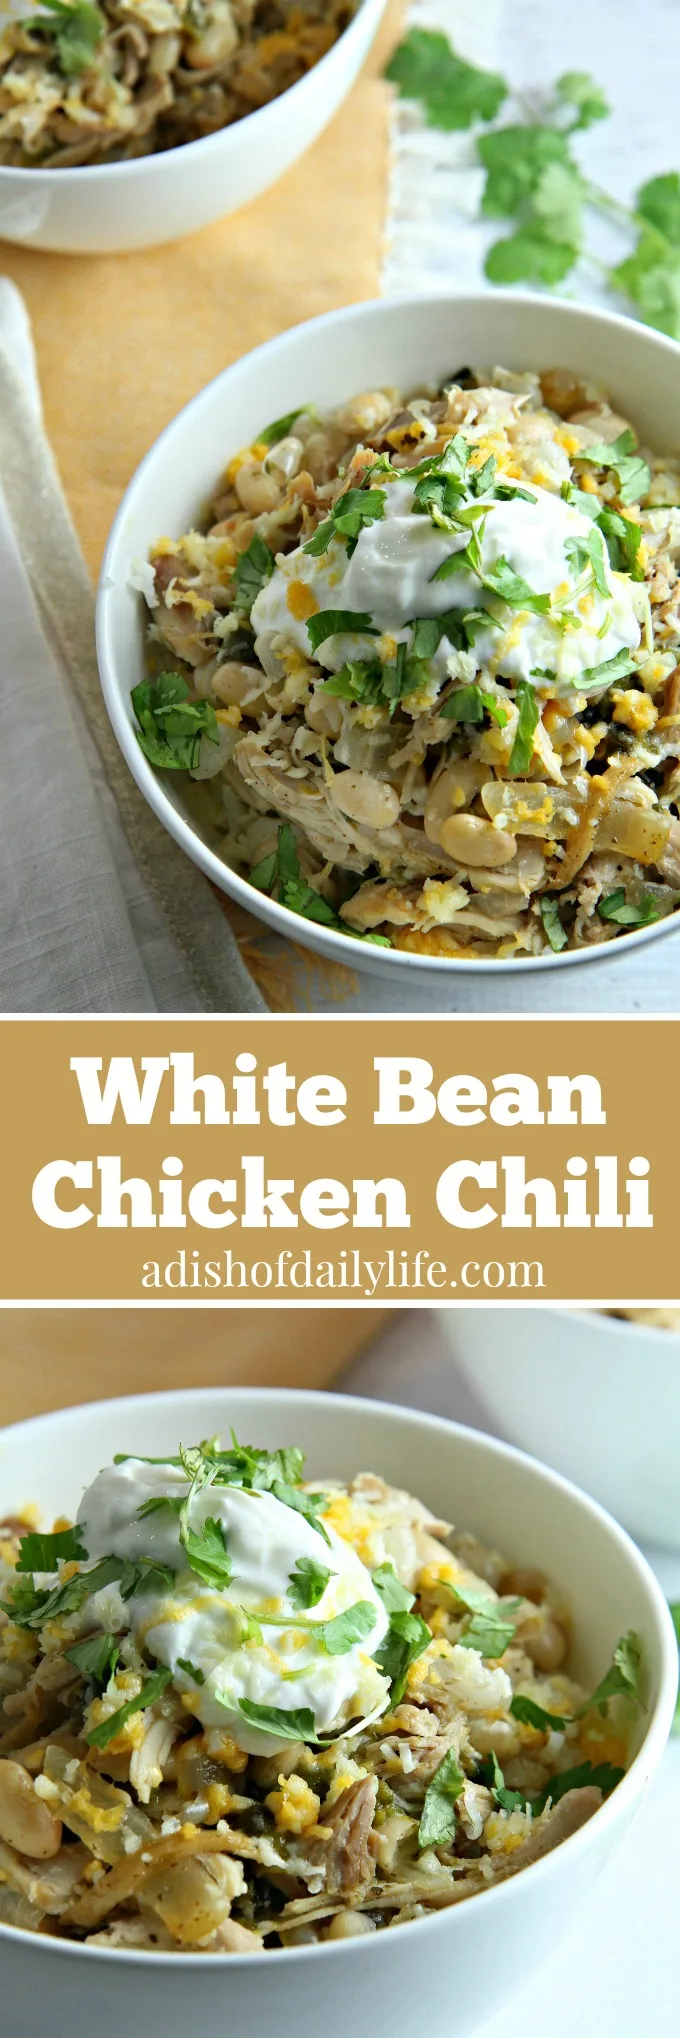 White Bean Chicken Chili is a healthy and delicious easy weeknight meal, but it's also perfect for game day. Guaranteed to be a hit with kids and adults alike!